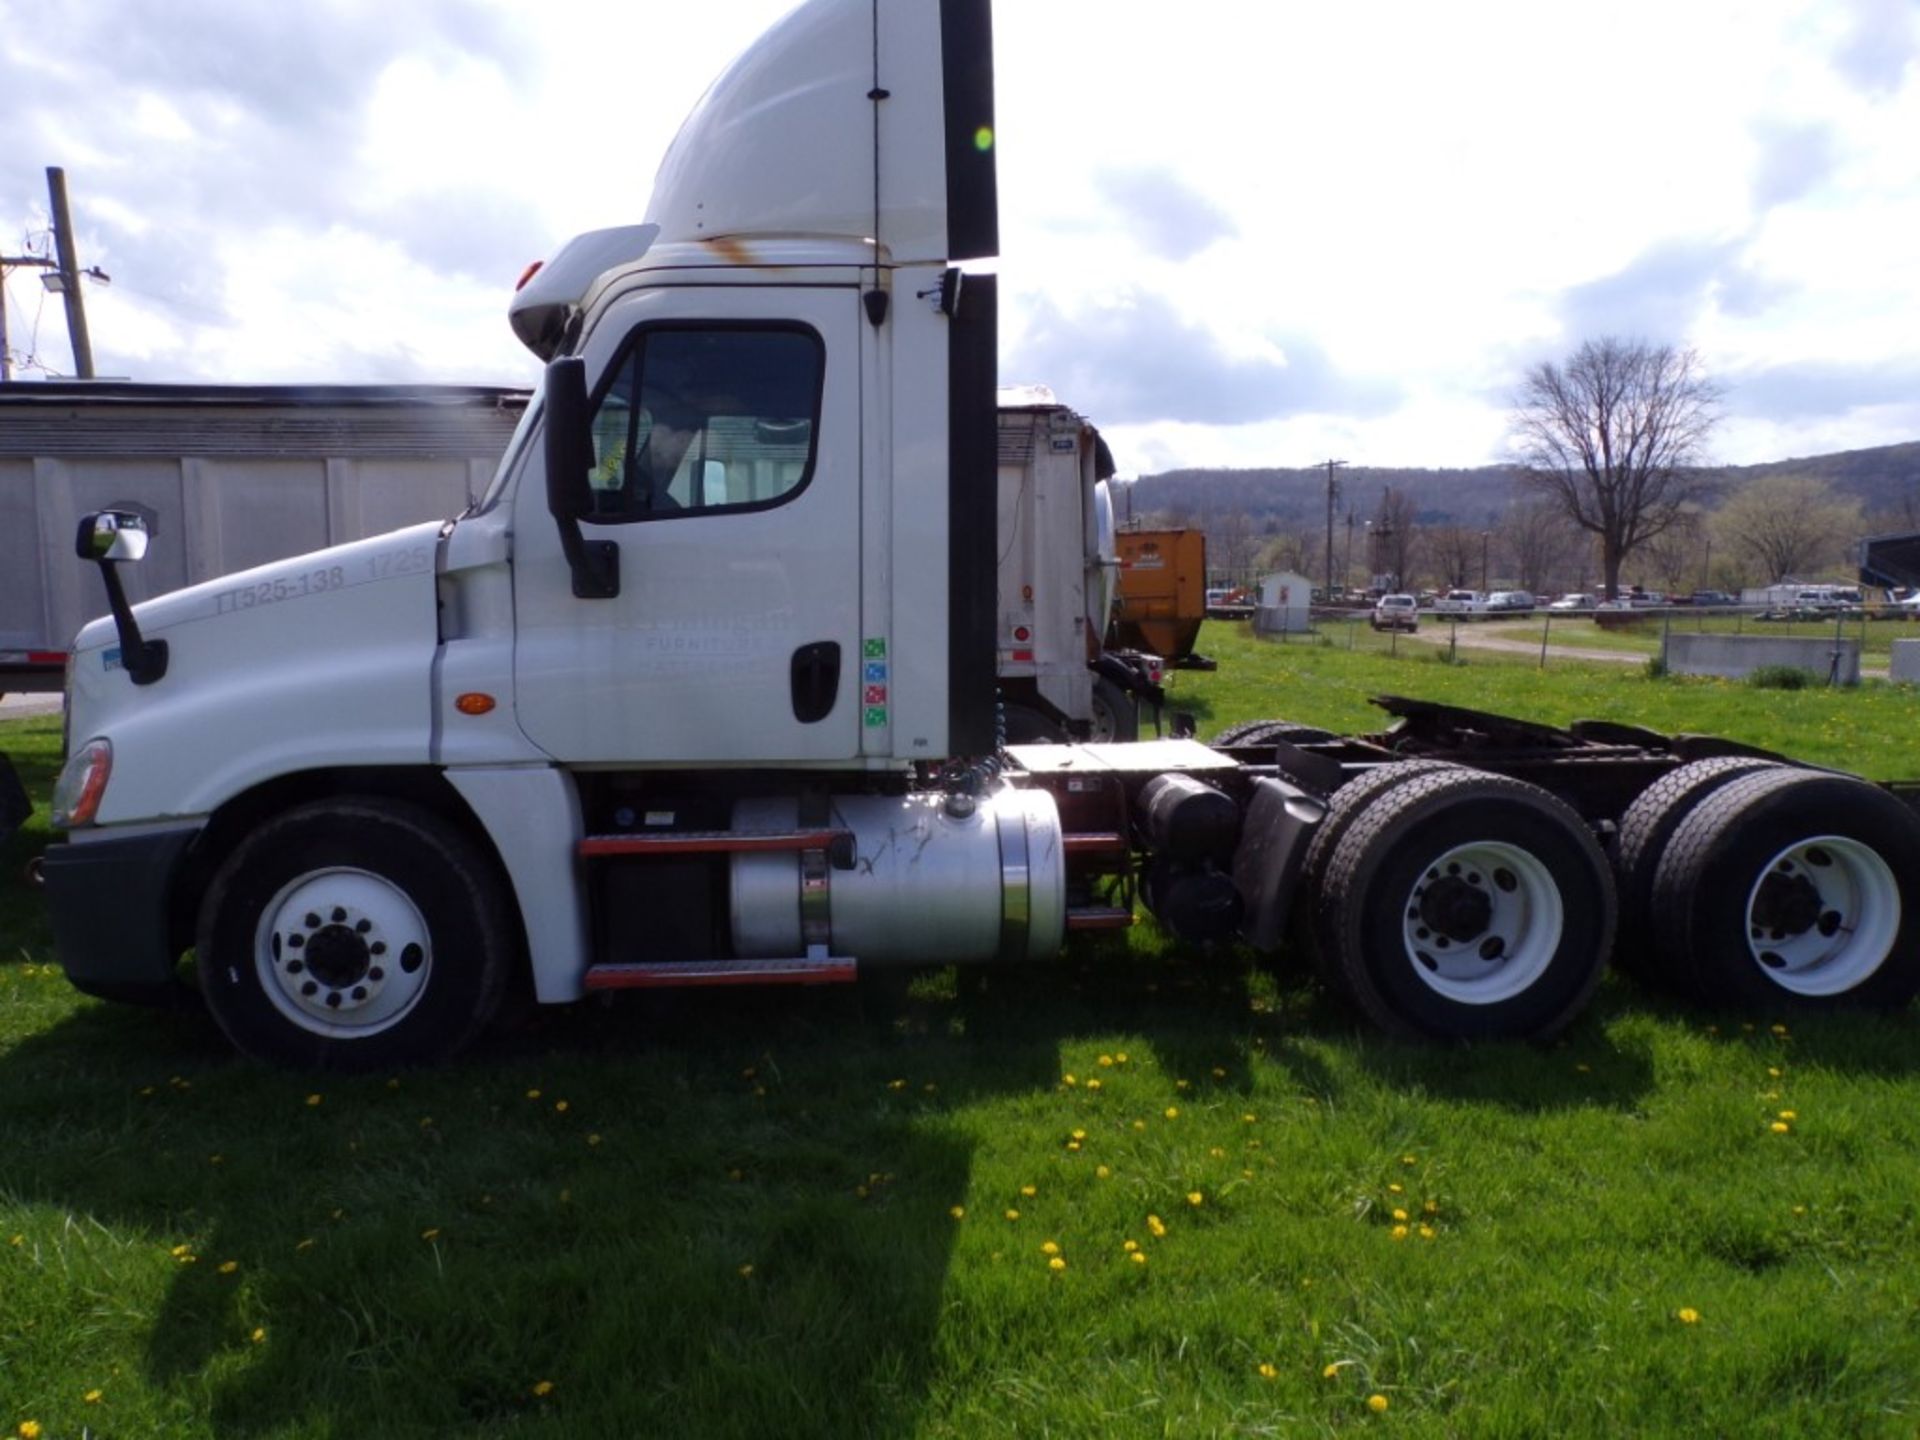 2017 Freightliner Cascadia Tandem Axle Day Cab Truck Tractor, Detroit dd15 Engine, 10 Spd. Manual